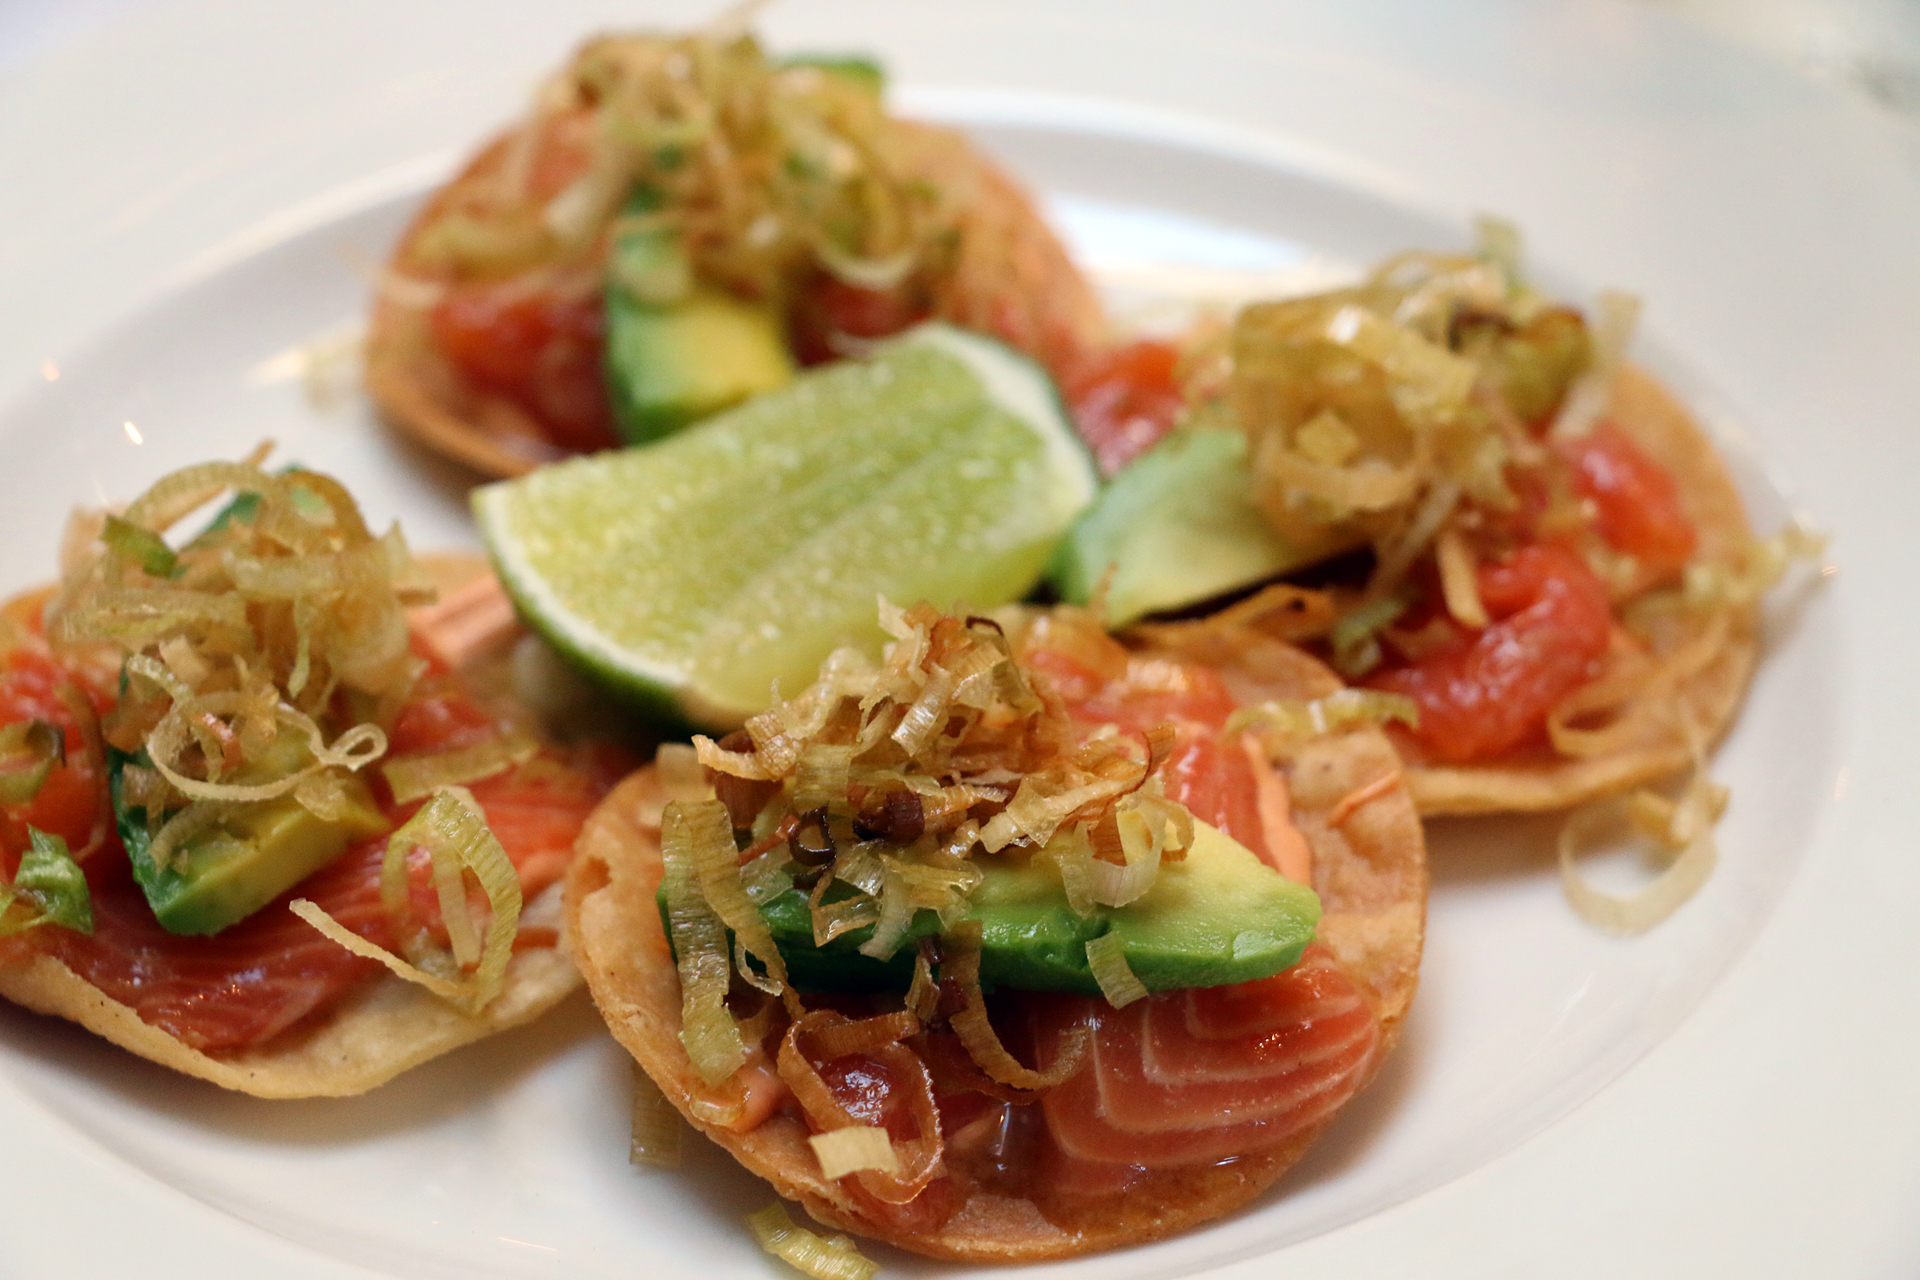 Trout tostadas with chipotle sauce and fried leeks.